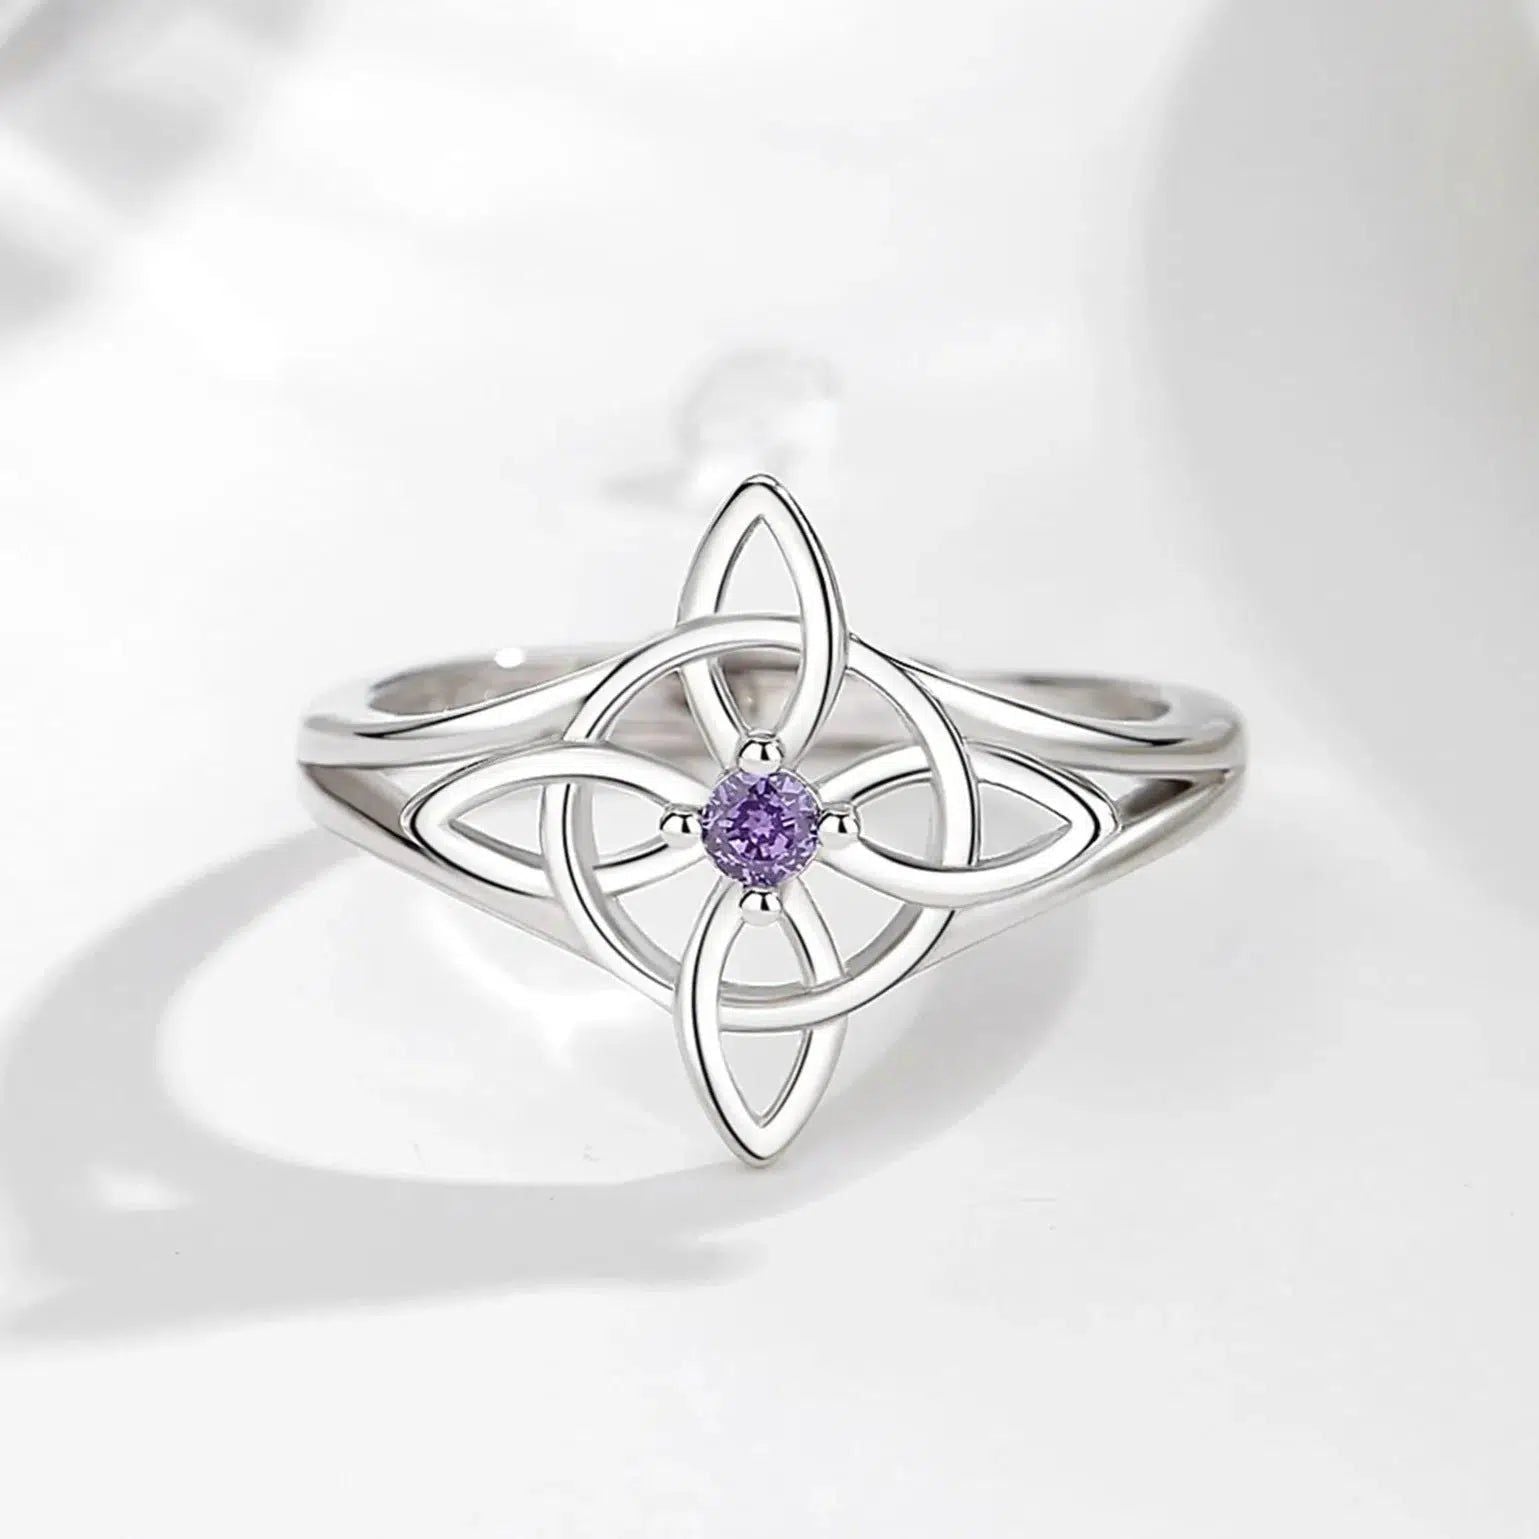 Celtic Knot Witchcraft Ring Wicca Jewelry-MoonChildWorld